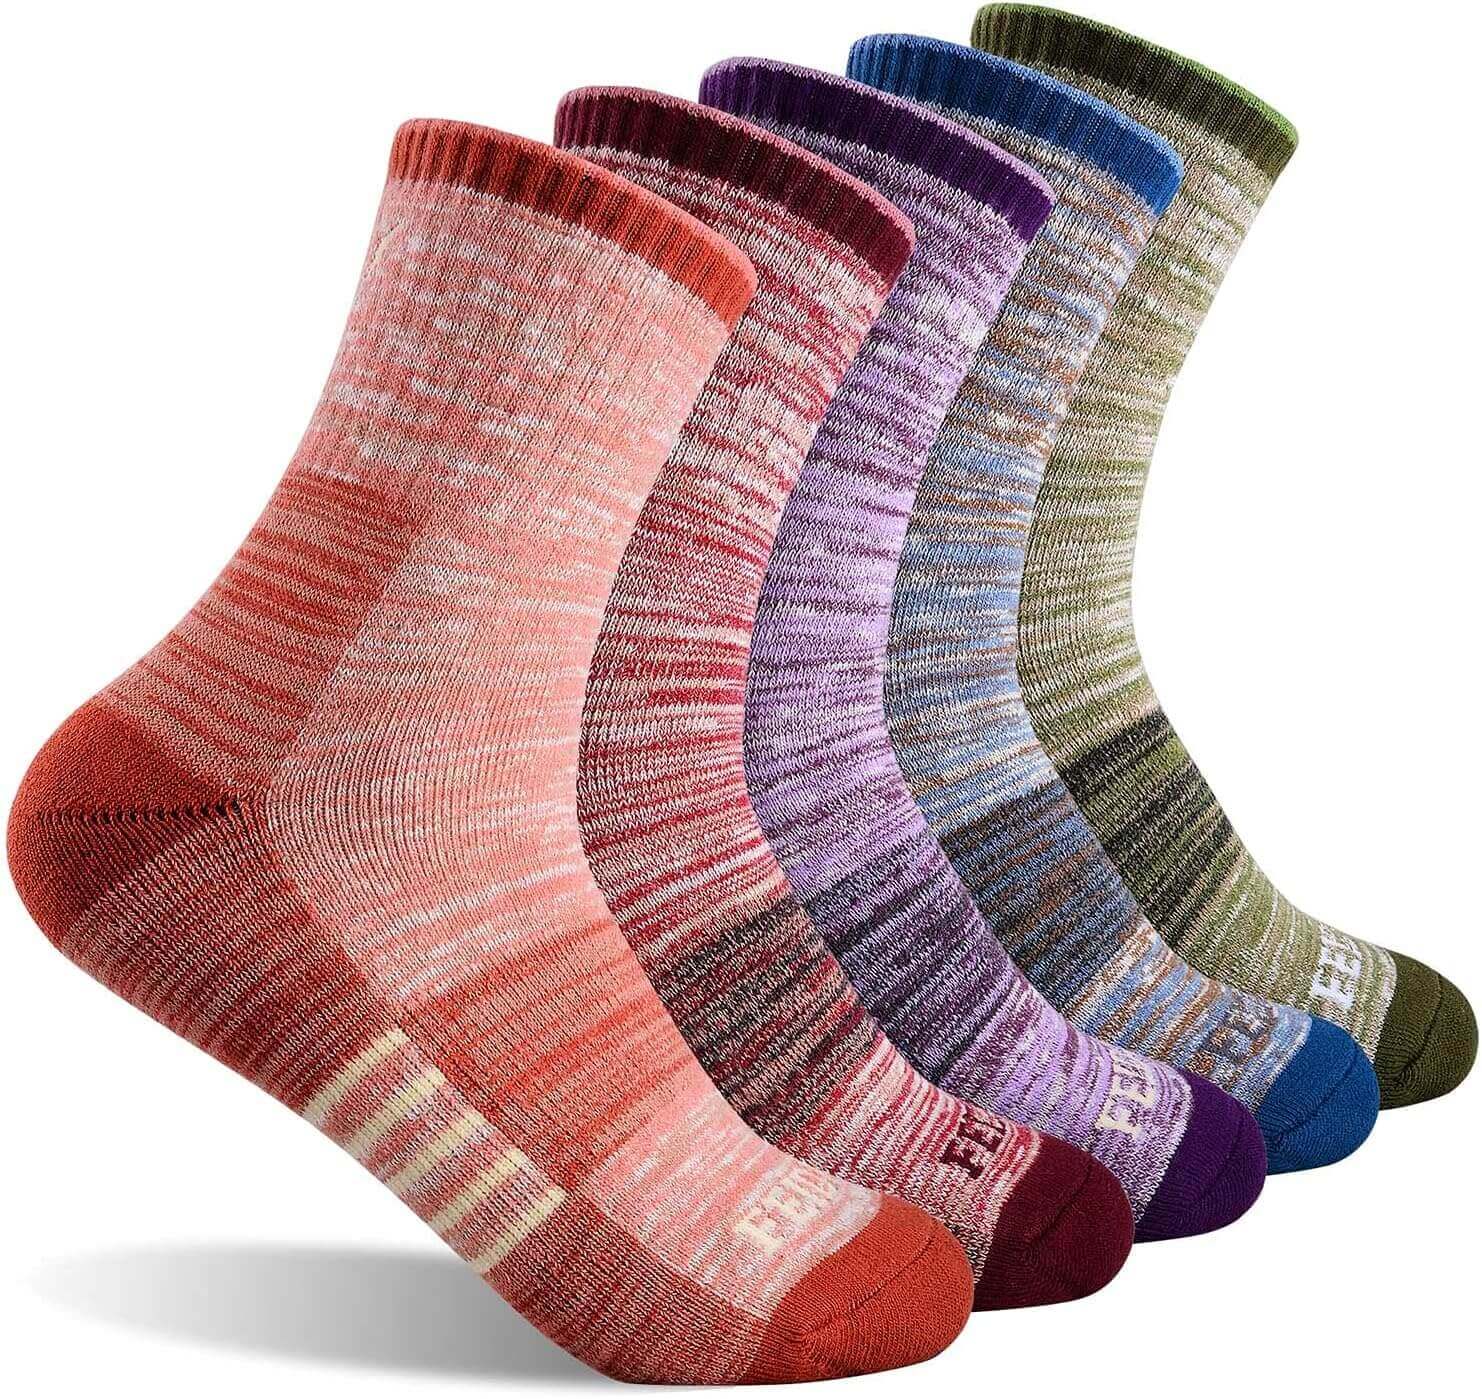 Shop The Latest >Women's Hiking Walking Socks, Multi-pack Outdoor Recreation > *Only $32.39*> From The Top Brand > *FEIDEERl* > Shop Now and Get Free Shipping On Orders Over $45.00 >*Shop Earth Foot*